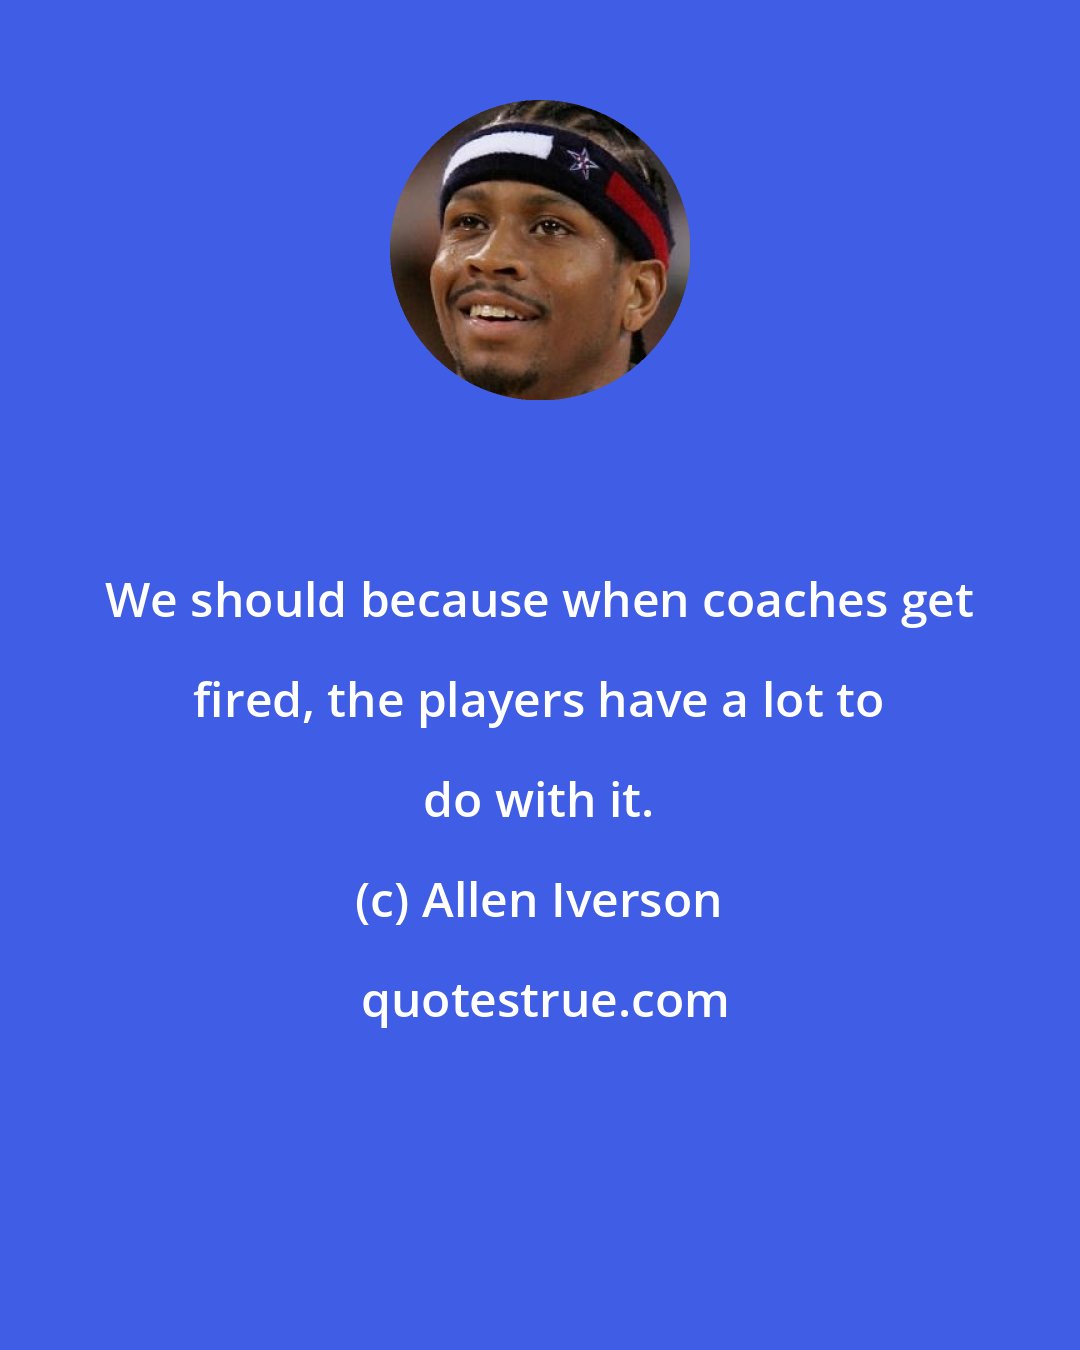 Allen Iverson: We should because when coaches get fired, the players have a lot to do with it.